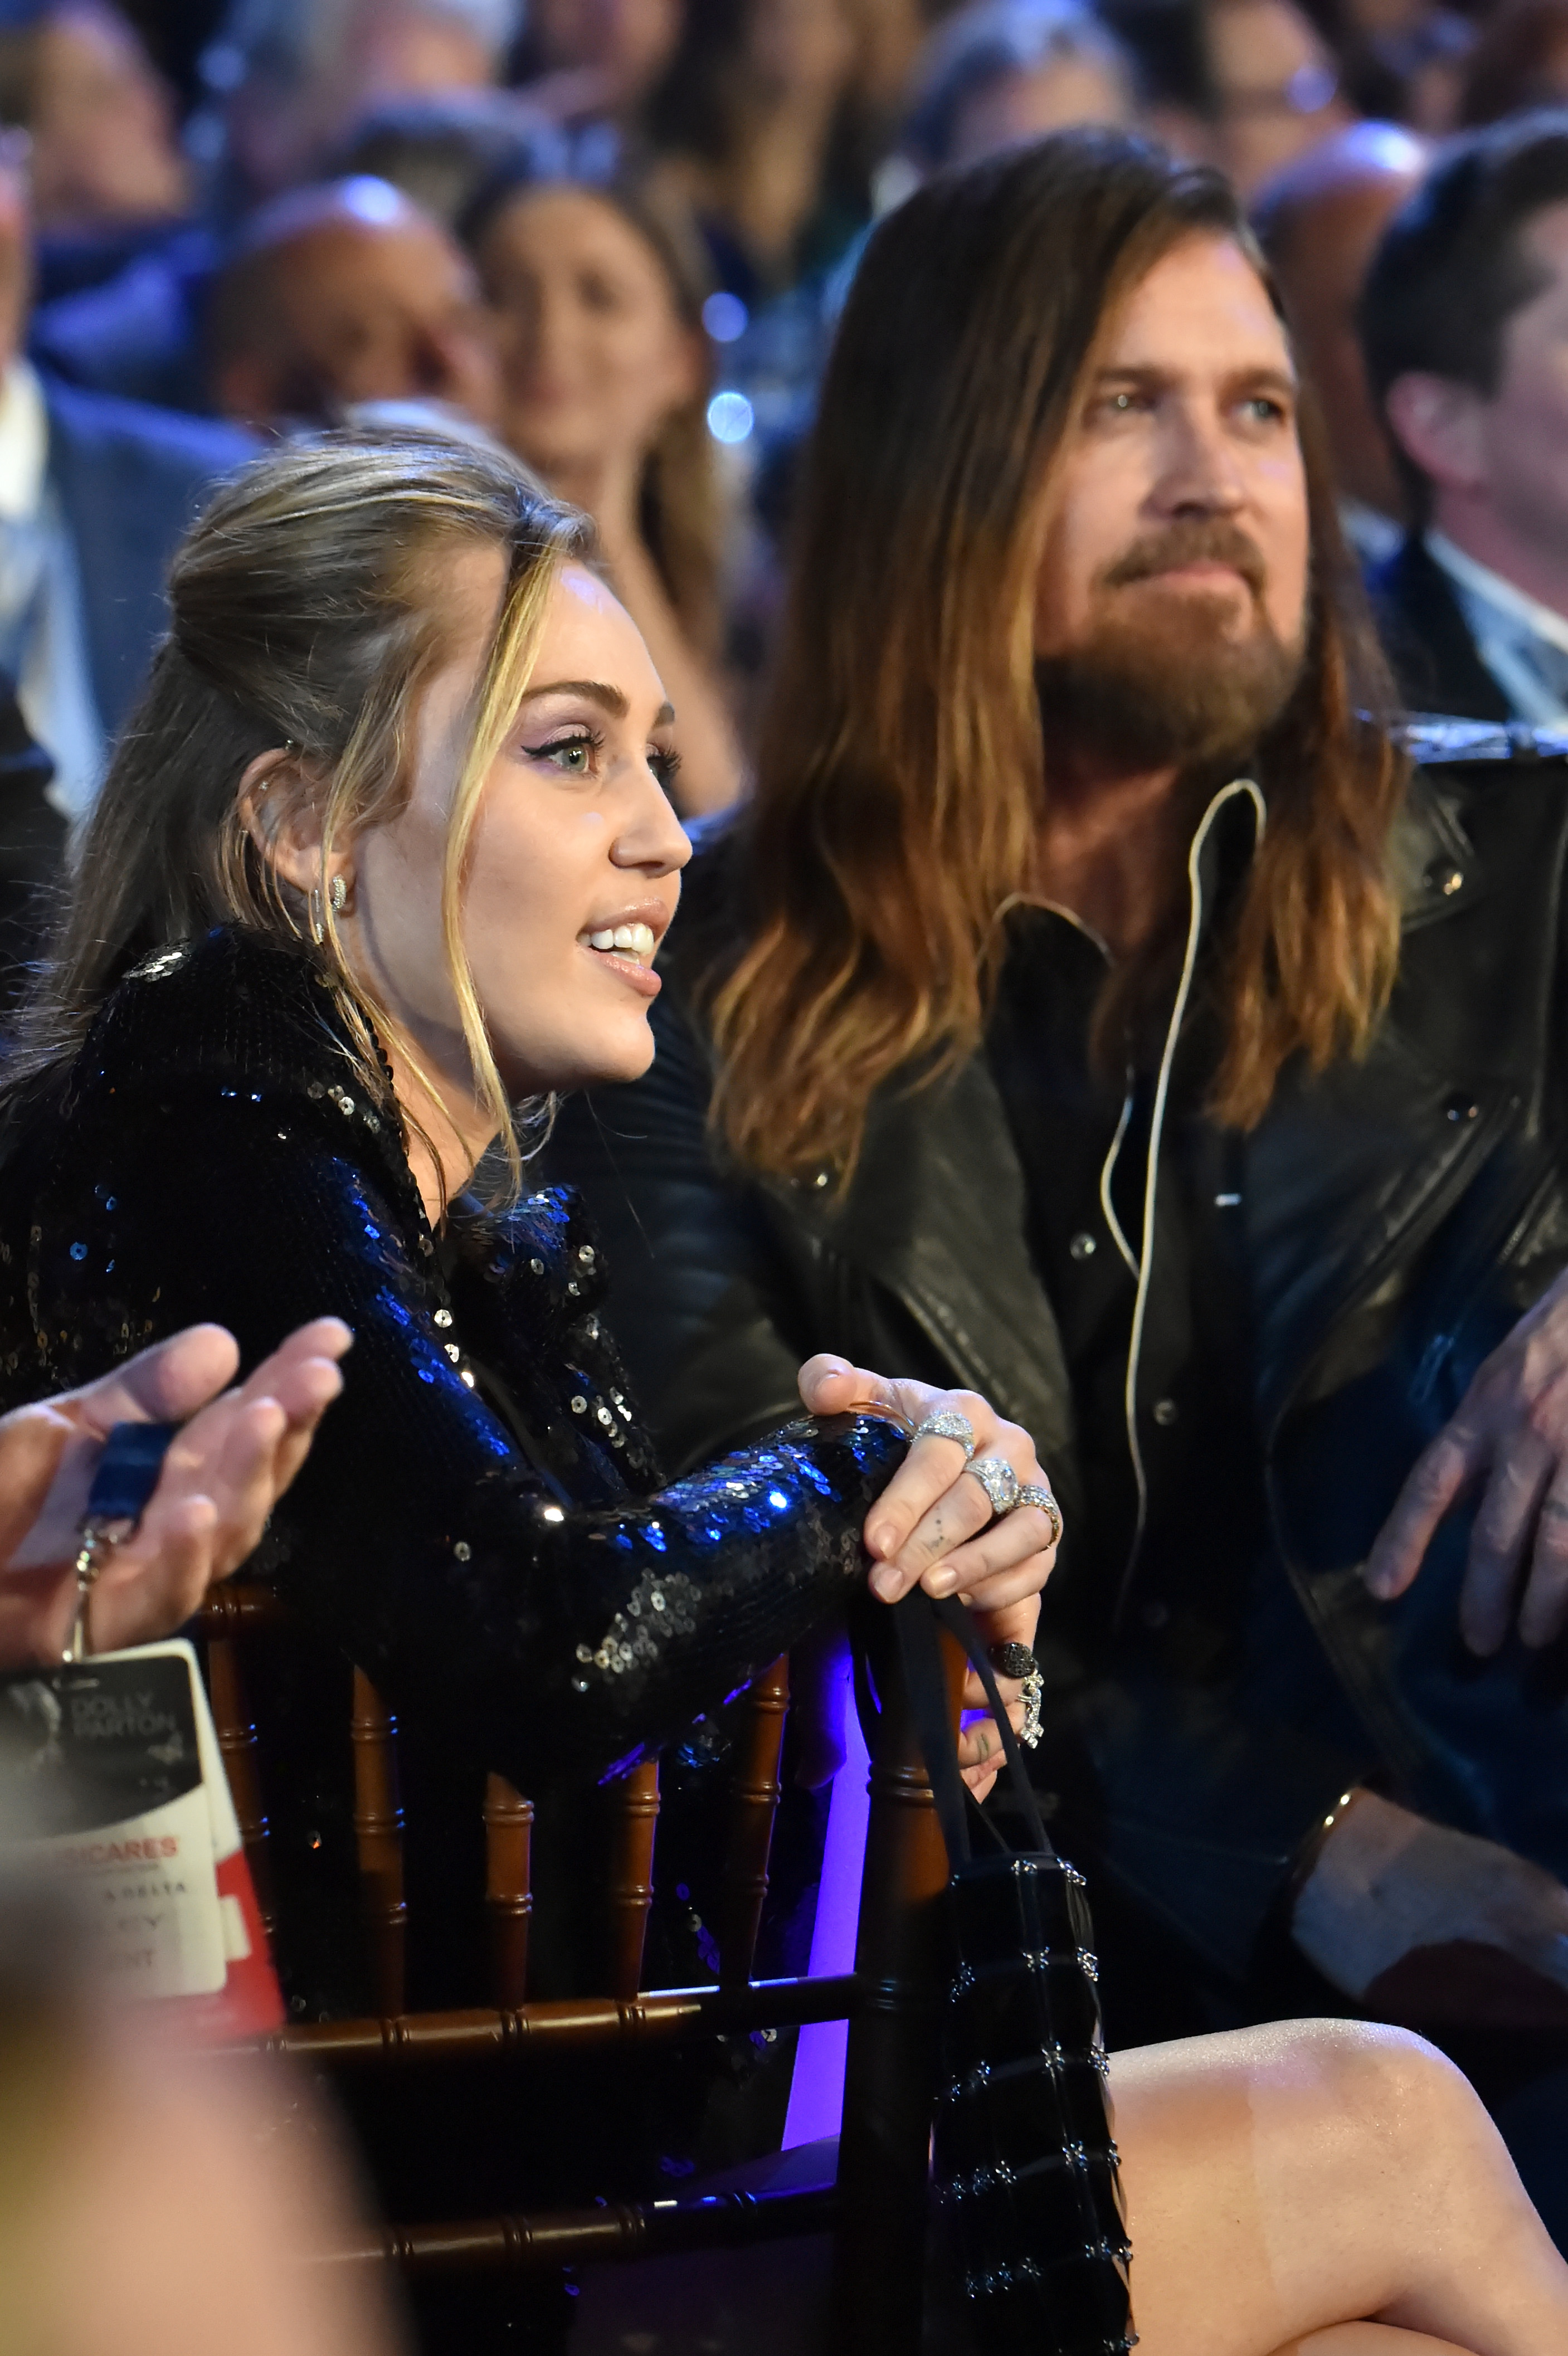 Miley Cyrus and Billy Ray Cyrus in Los Angeles, California, on February 8, 2019 | Source: Getty Images